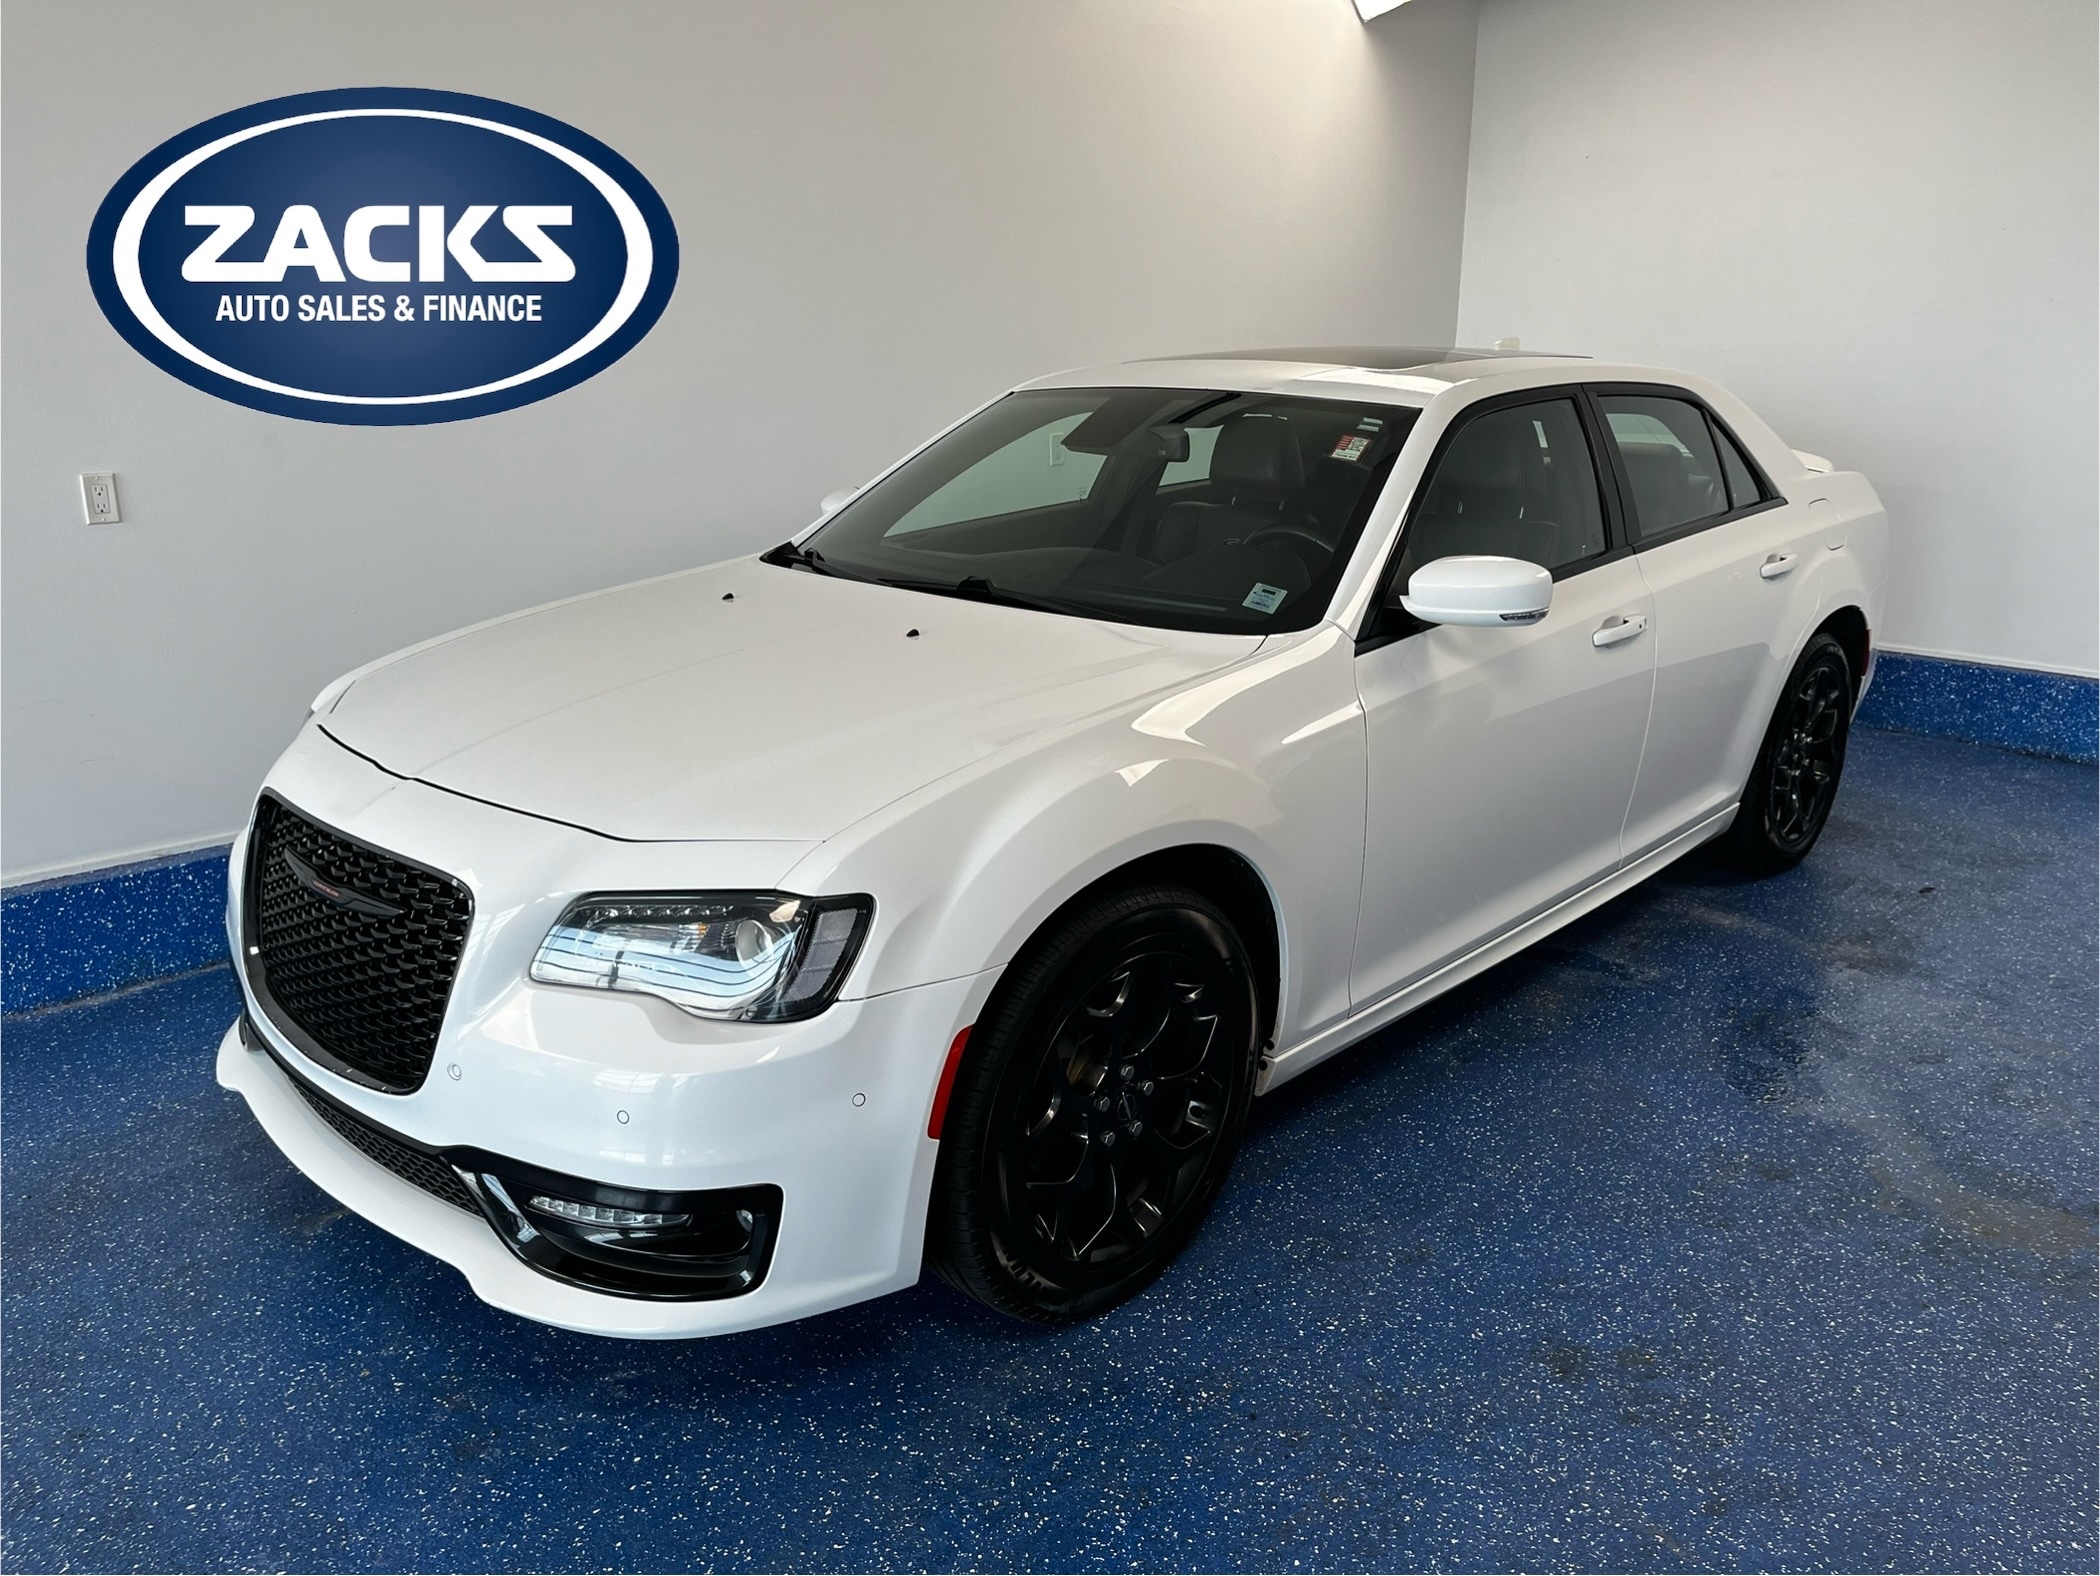 2021 Chrysler 300 S Package AWD | Zacks Certified | PanoRoof